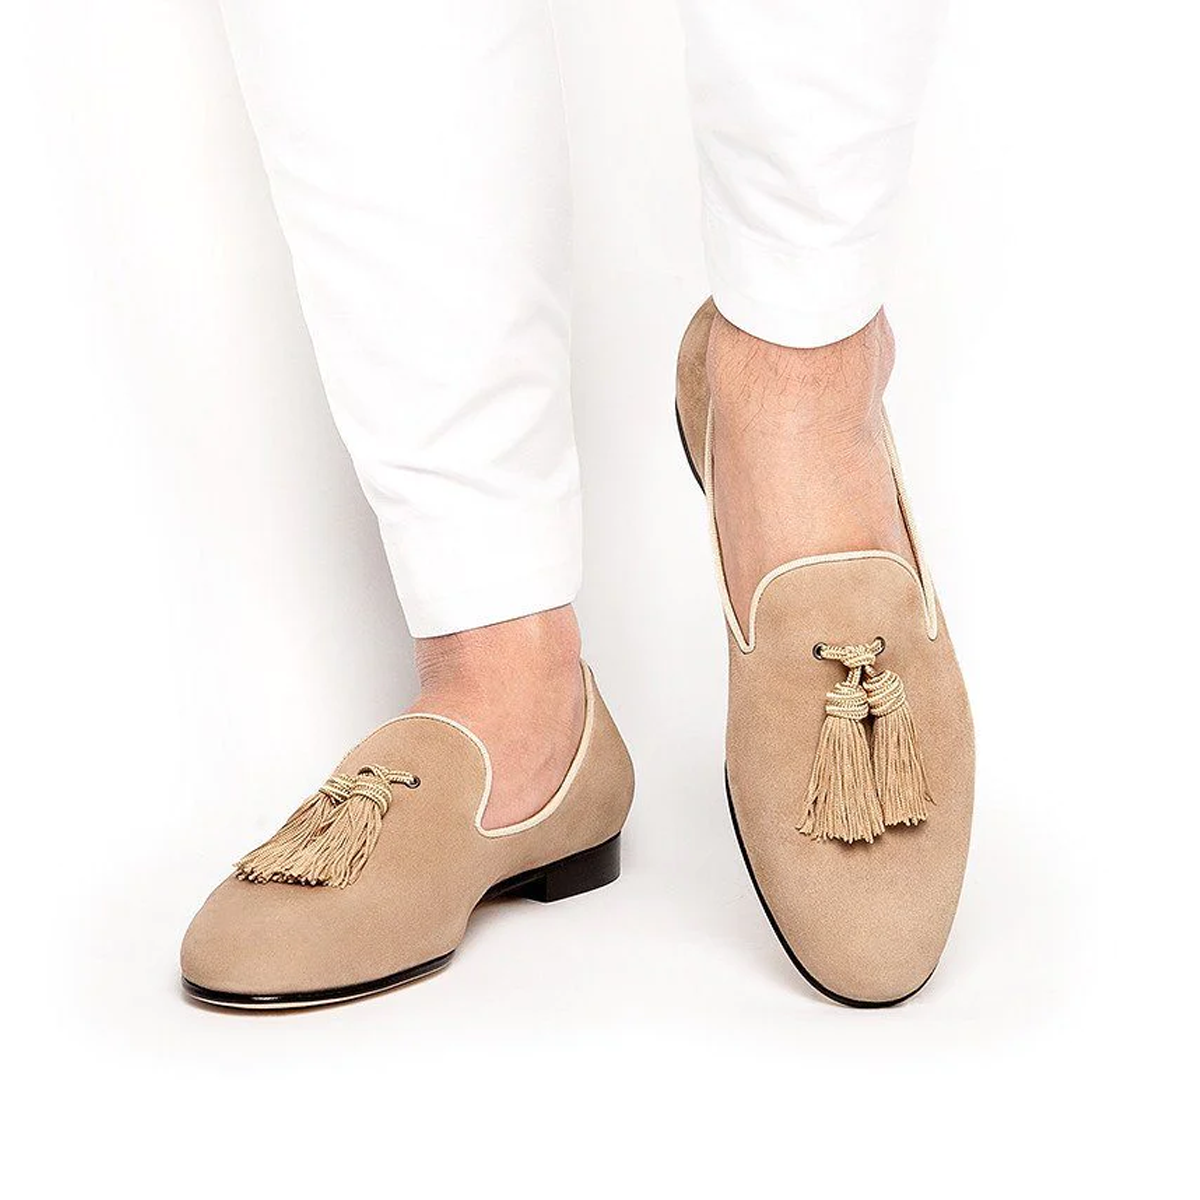 Twin Traverse Loafers Shoes